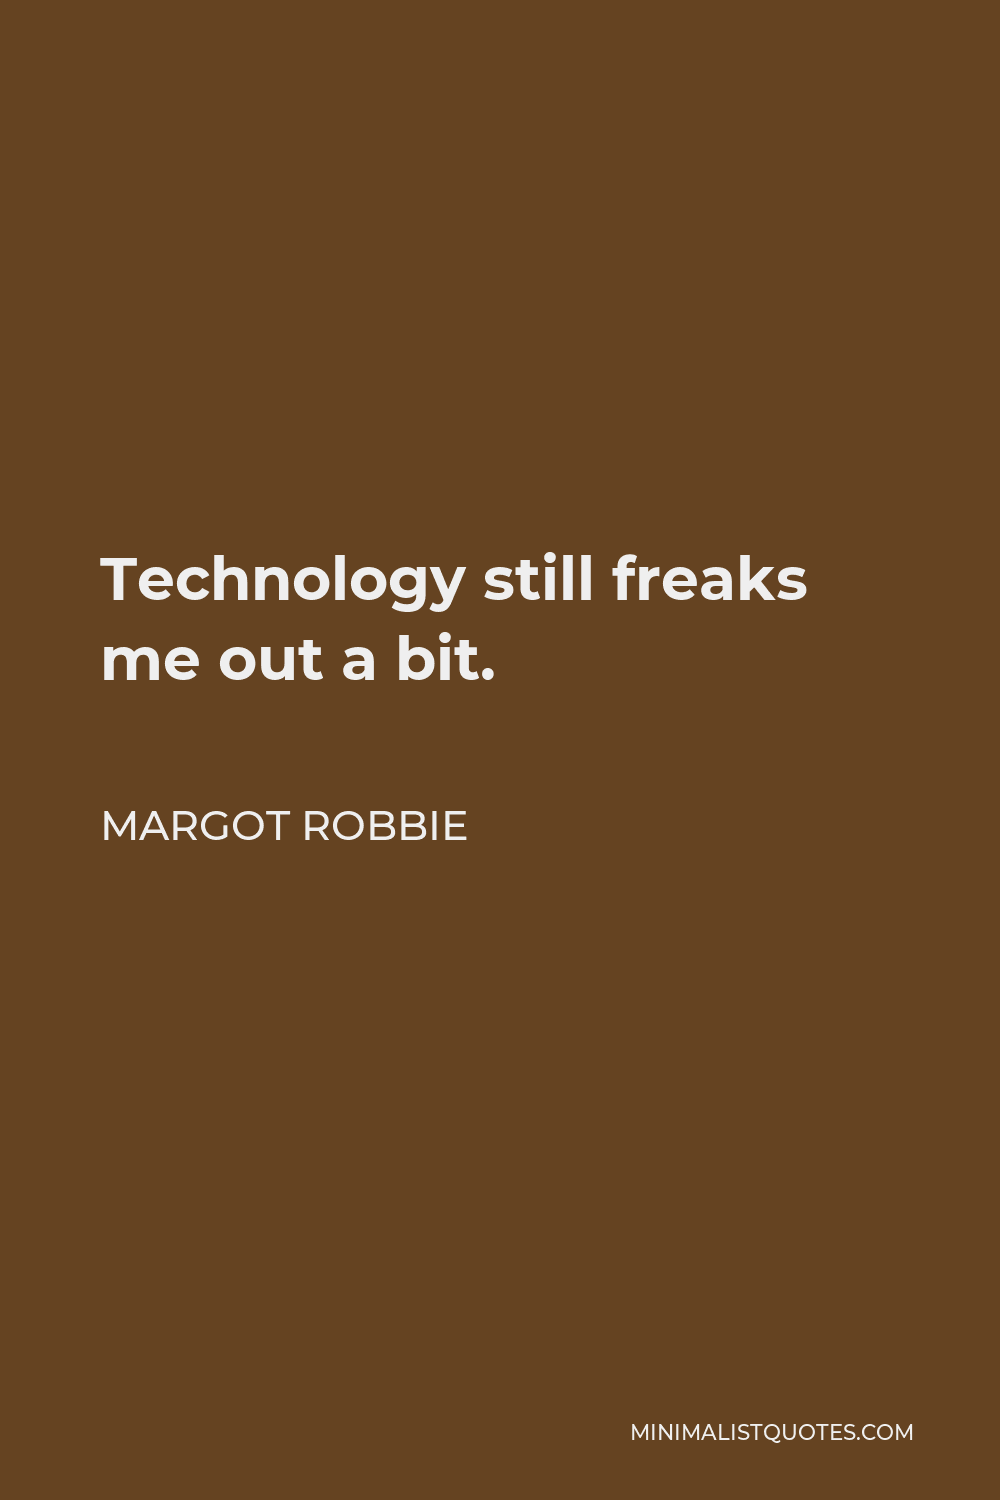 Margot Robbie Quote - Technology still freaks me out a bit.